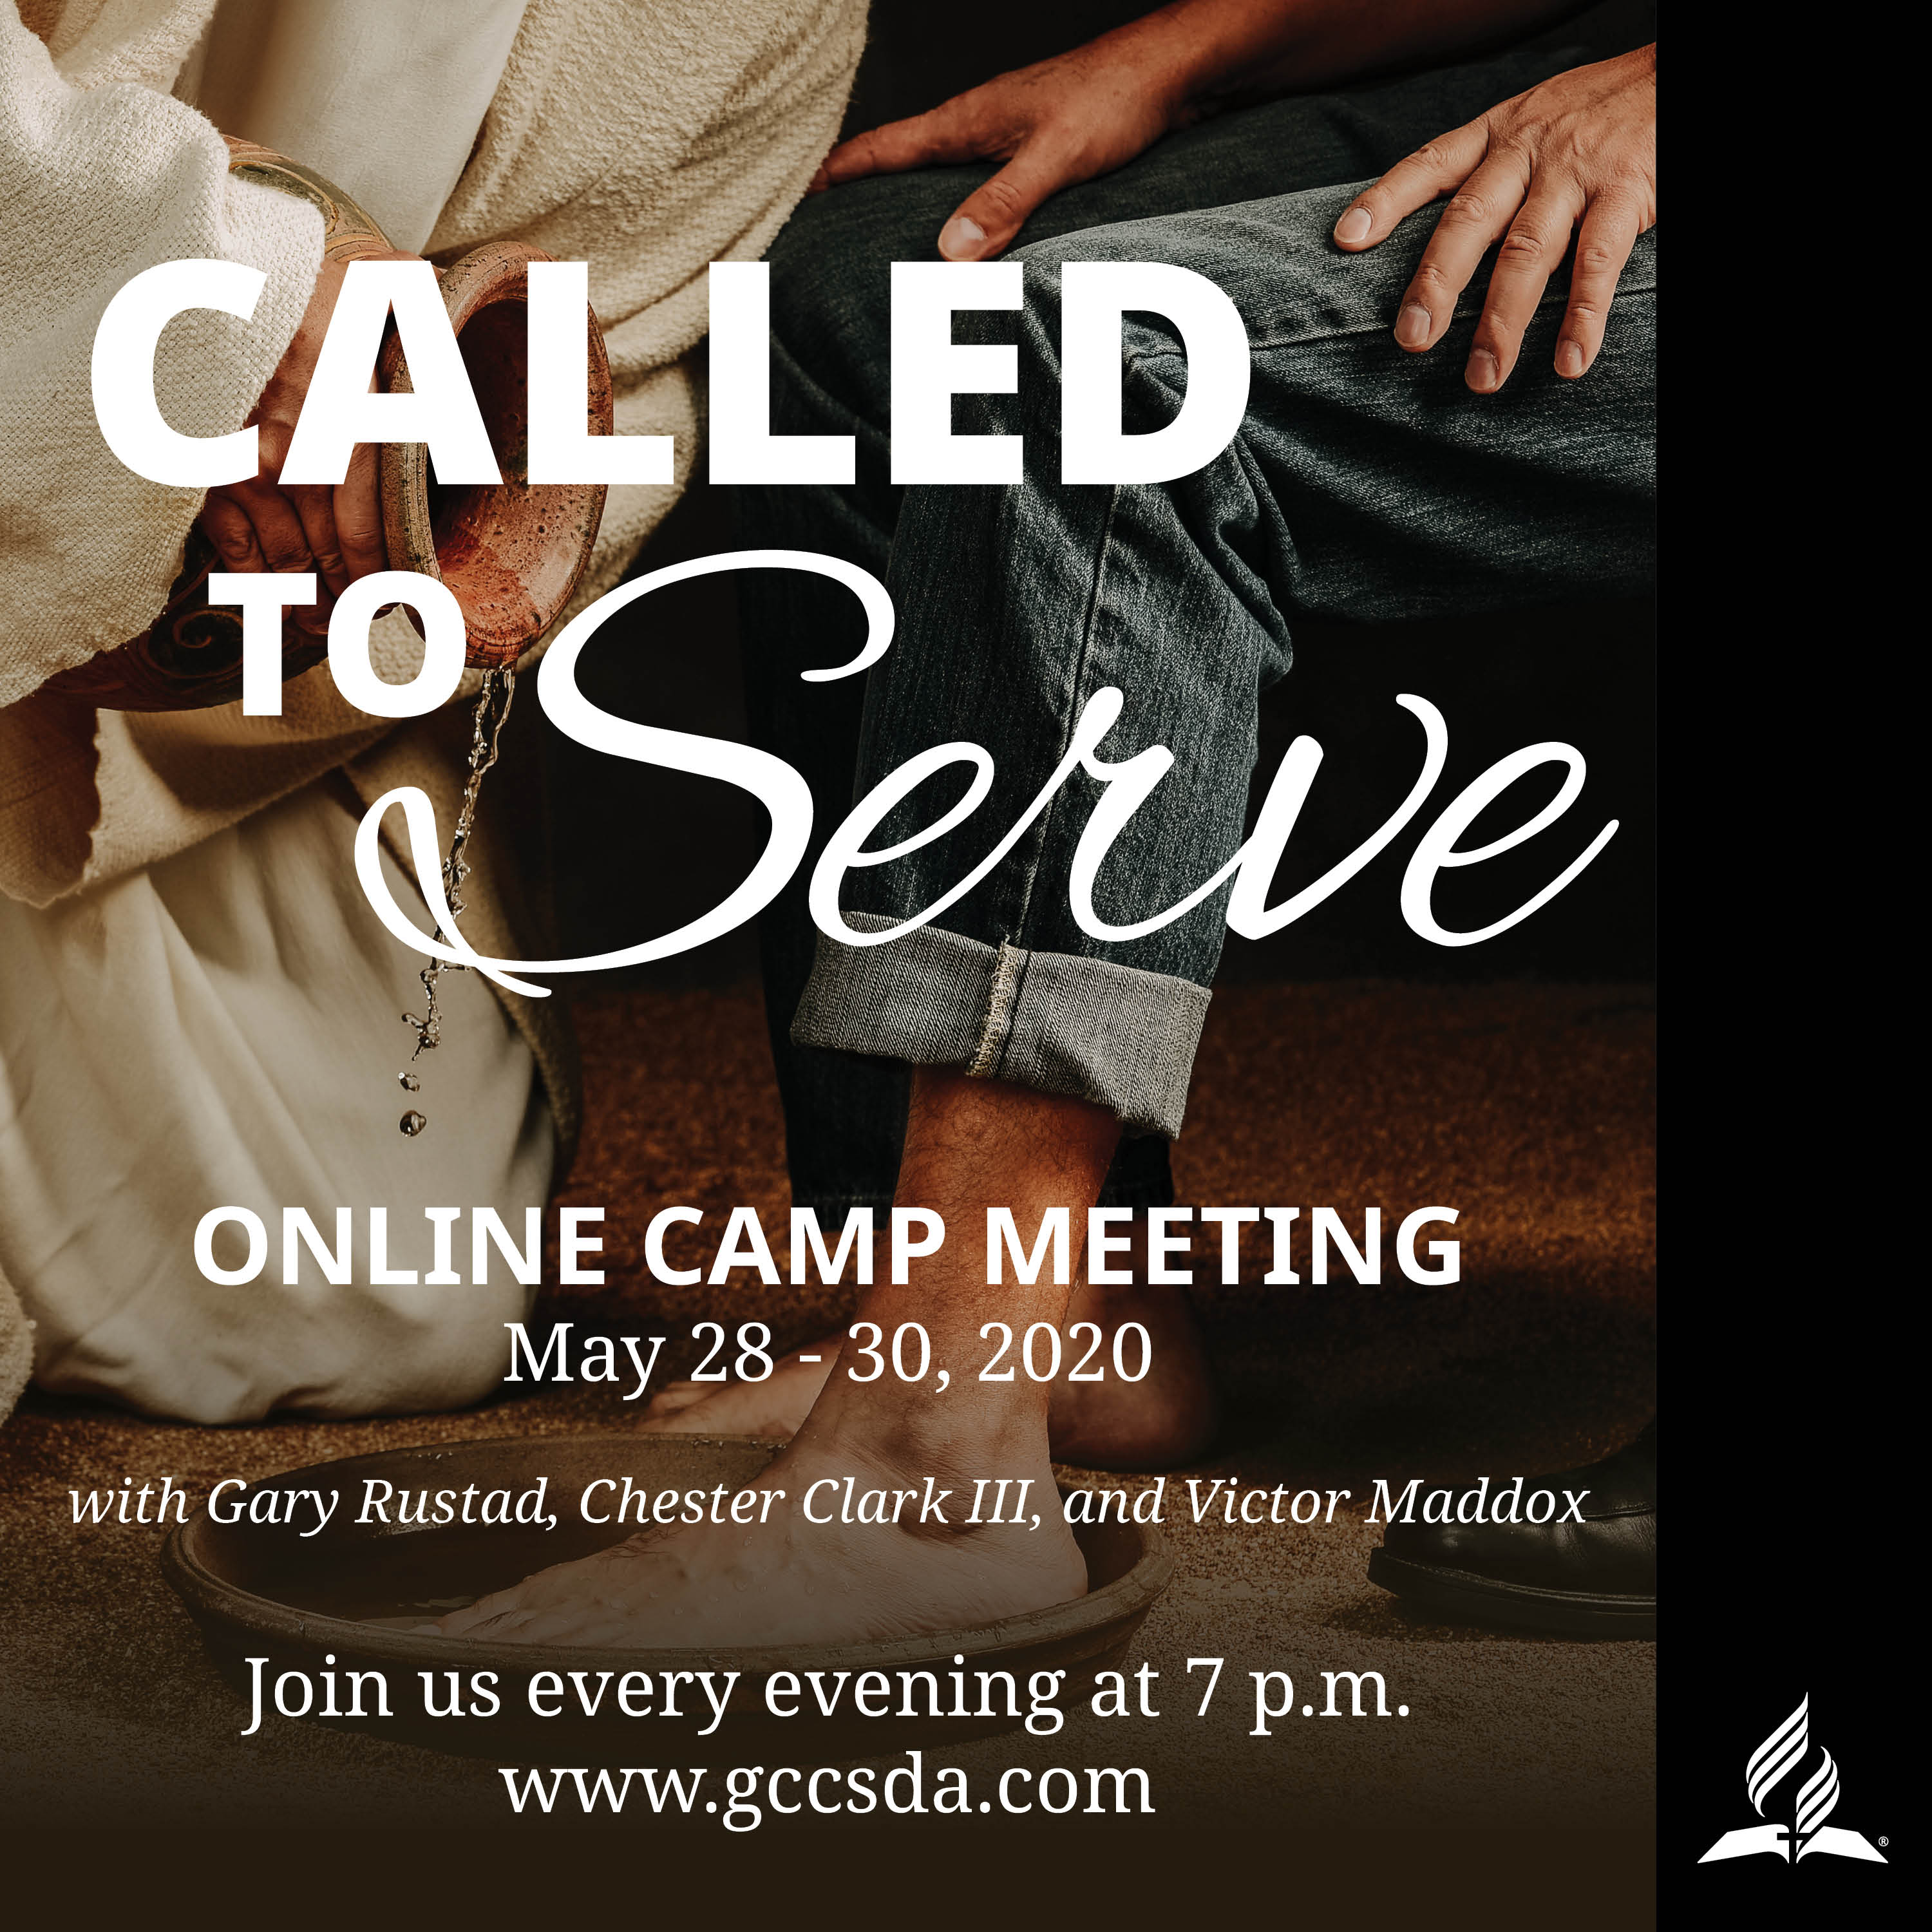 Called to Serve online Camp Meeting